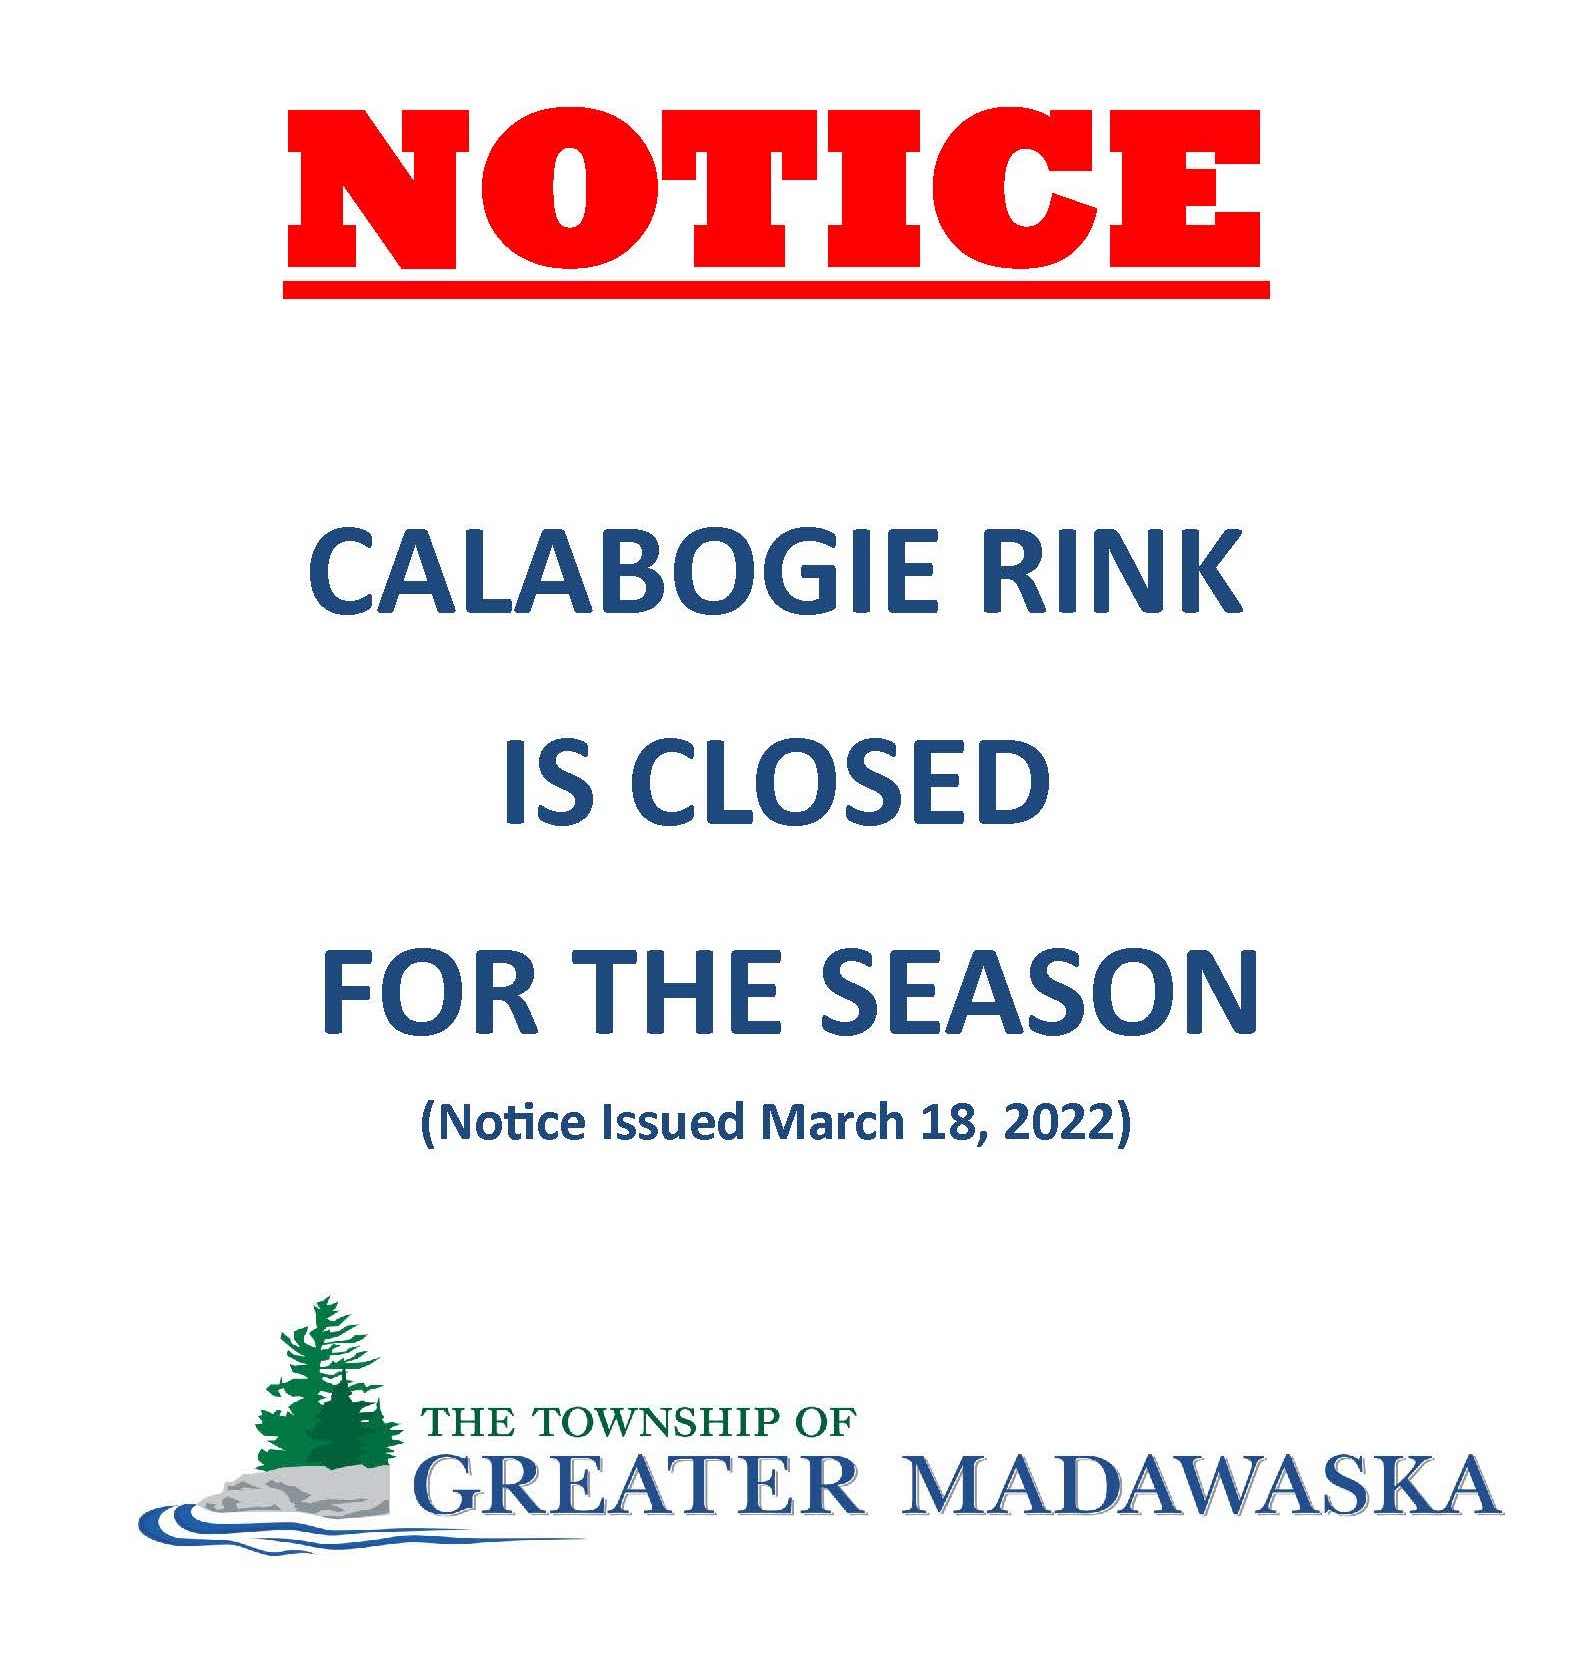 Calabogie Rink is closed